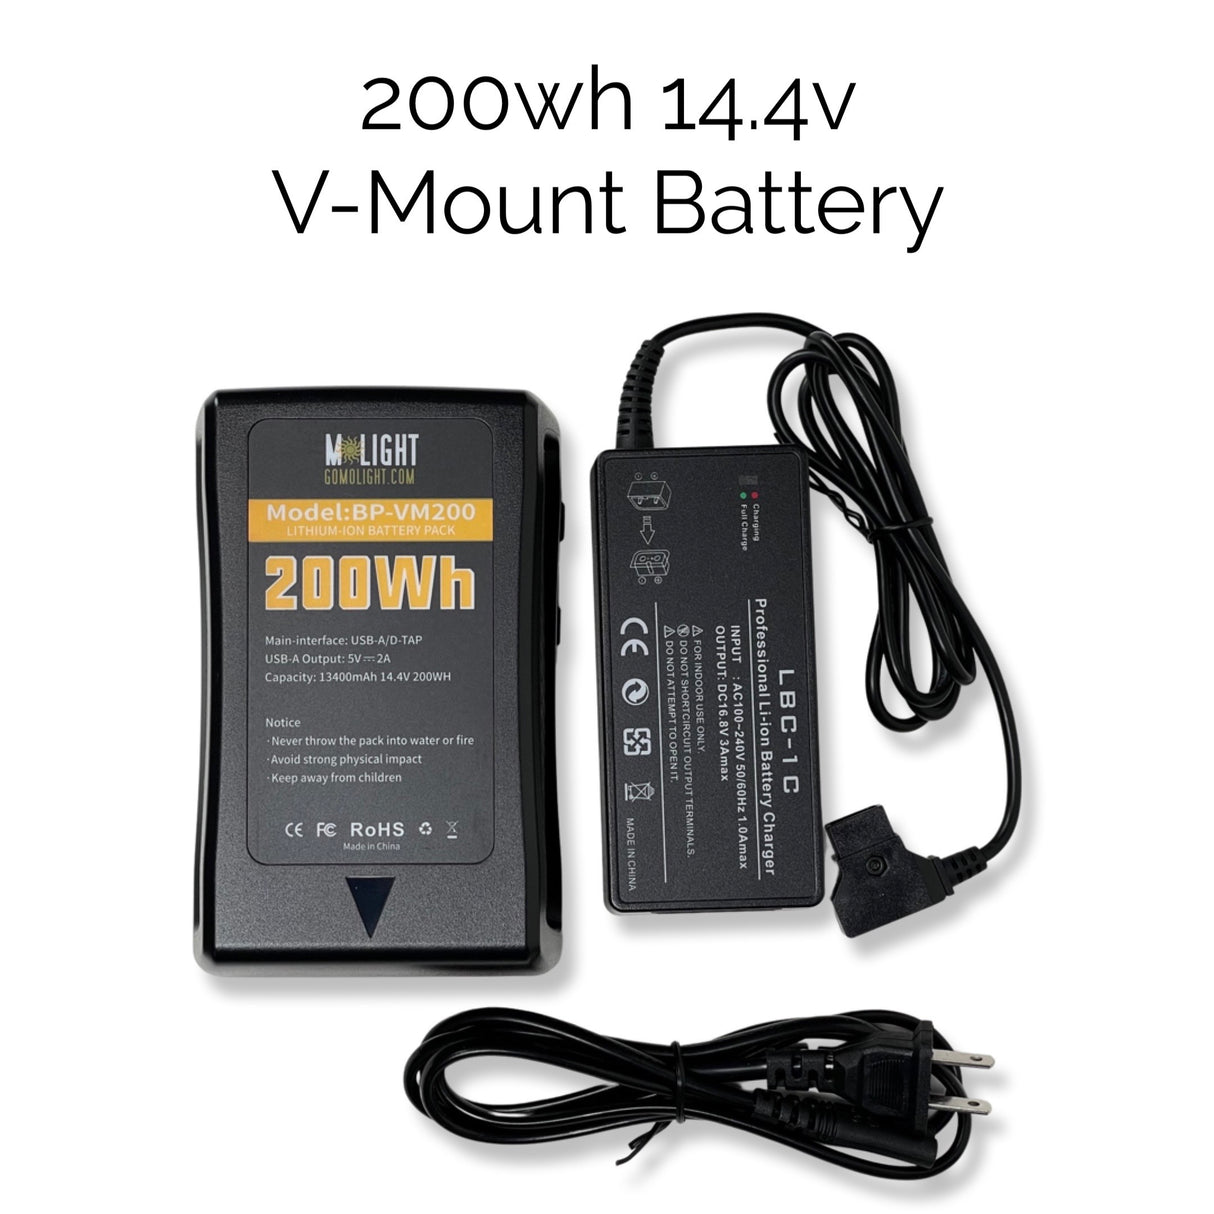 MoLight 200wh 14.4v V-Mount Battery and Charger